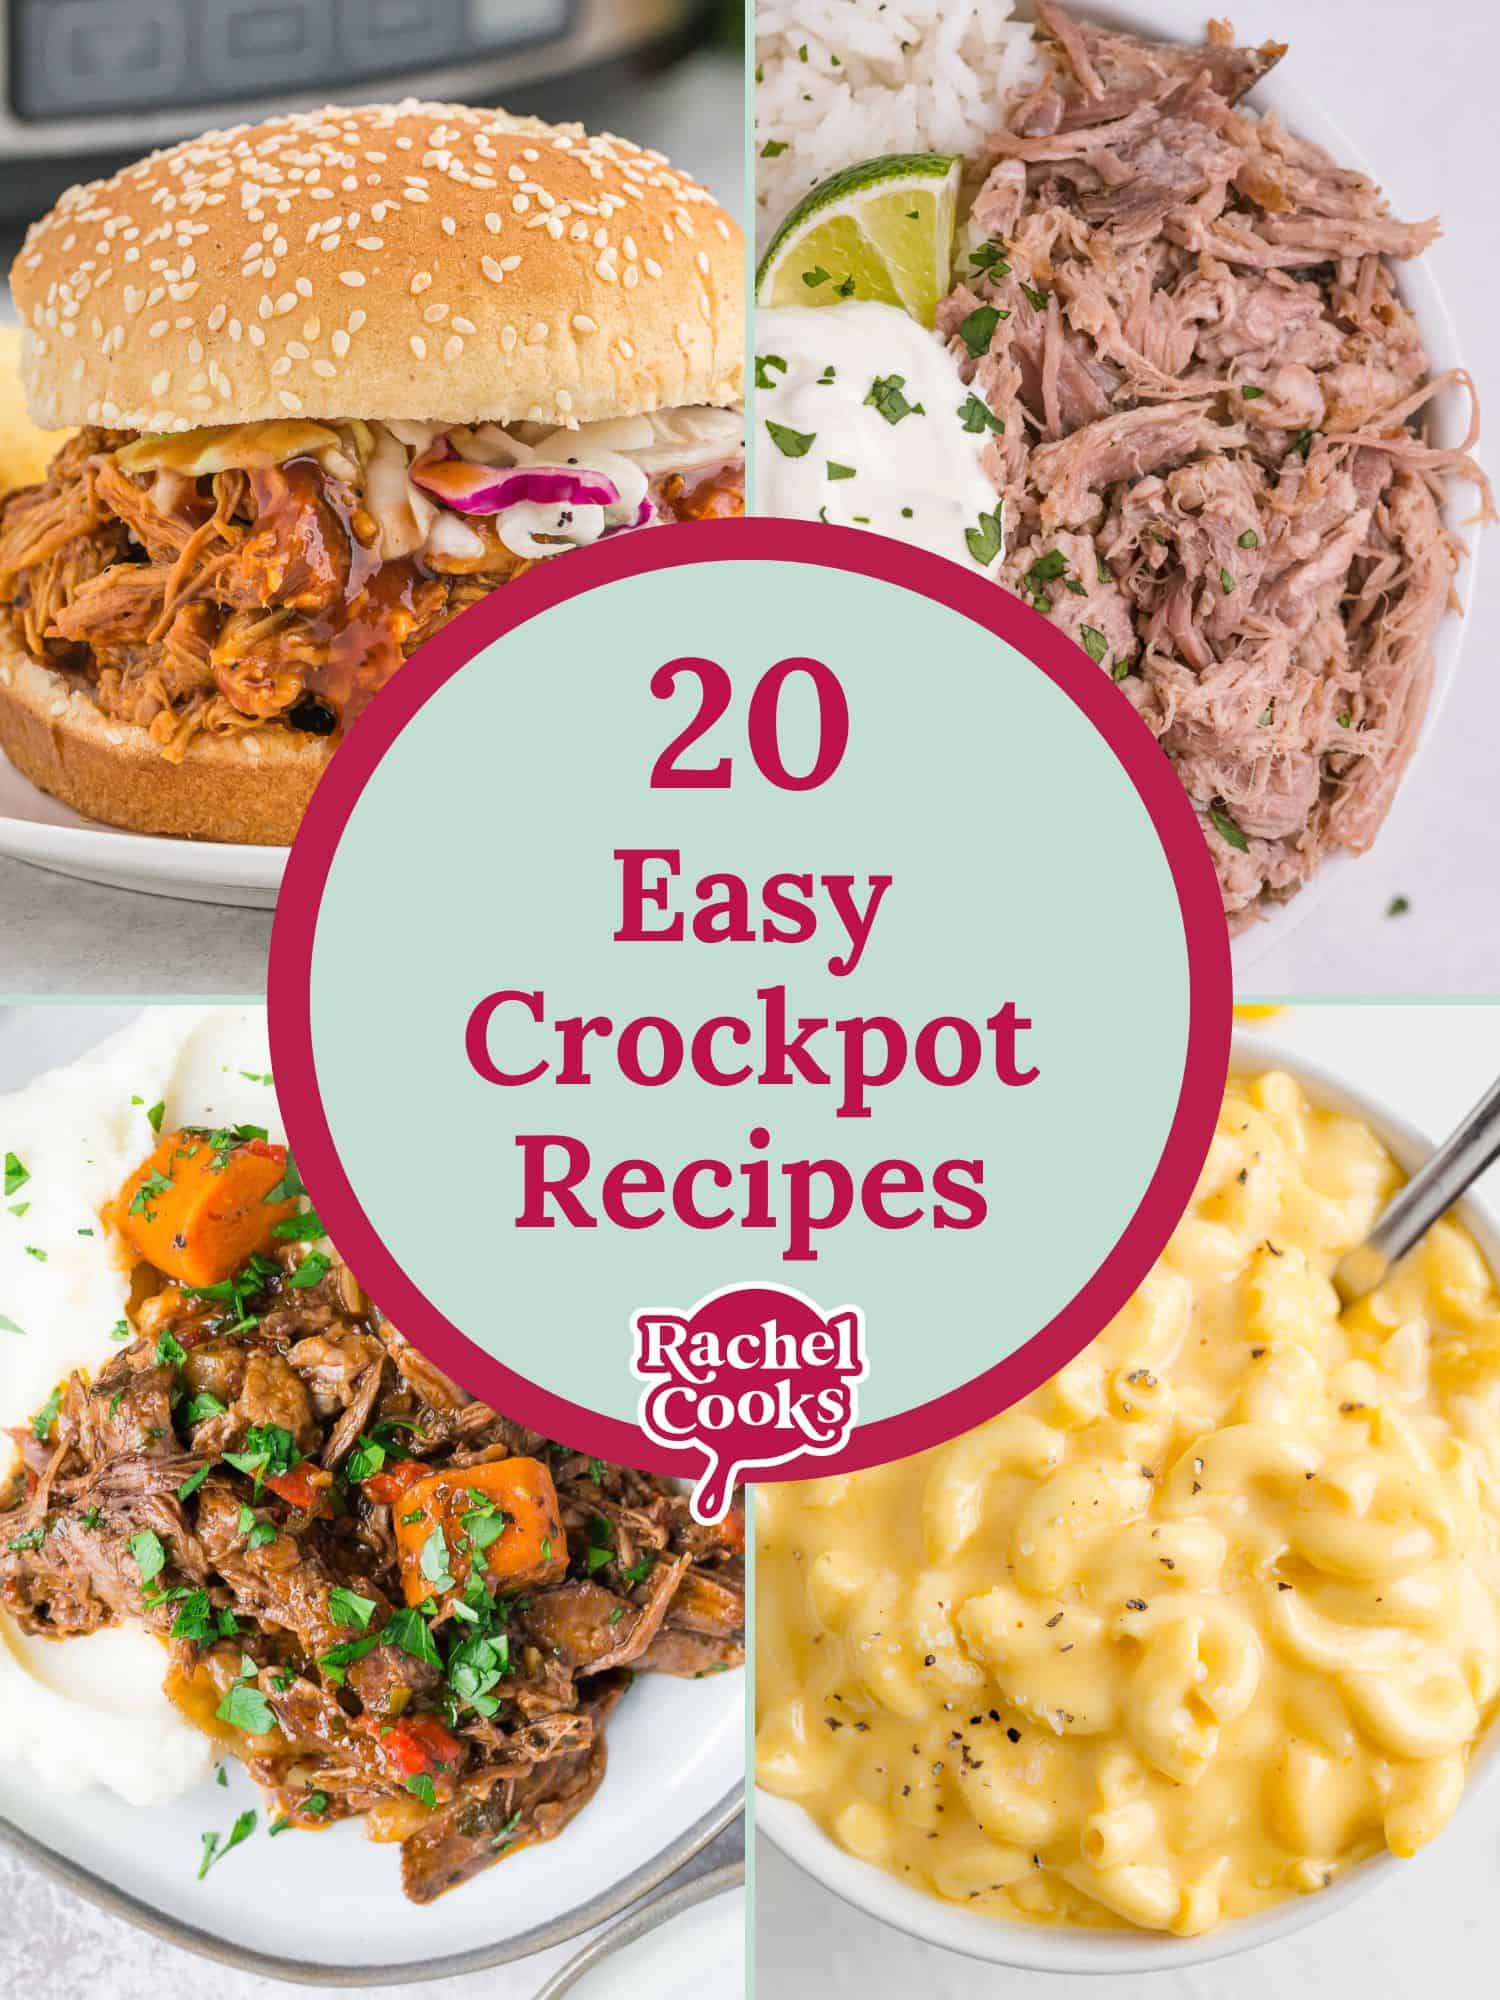 Crockpot recipes graphic with text.